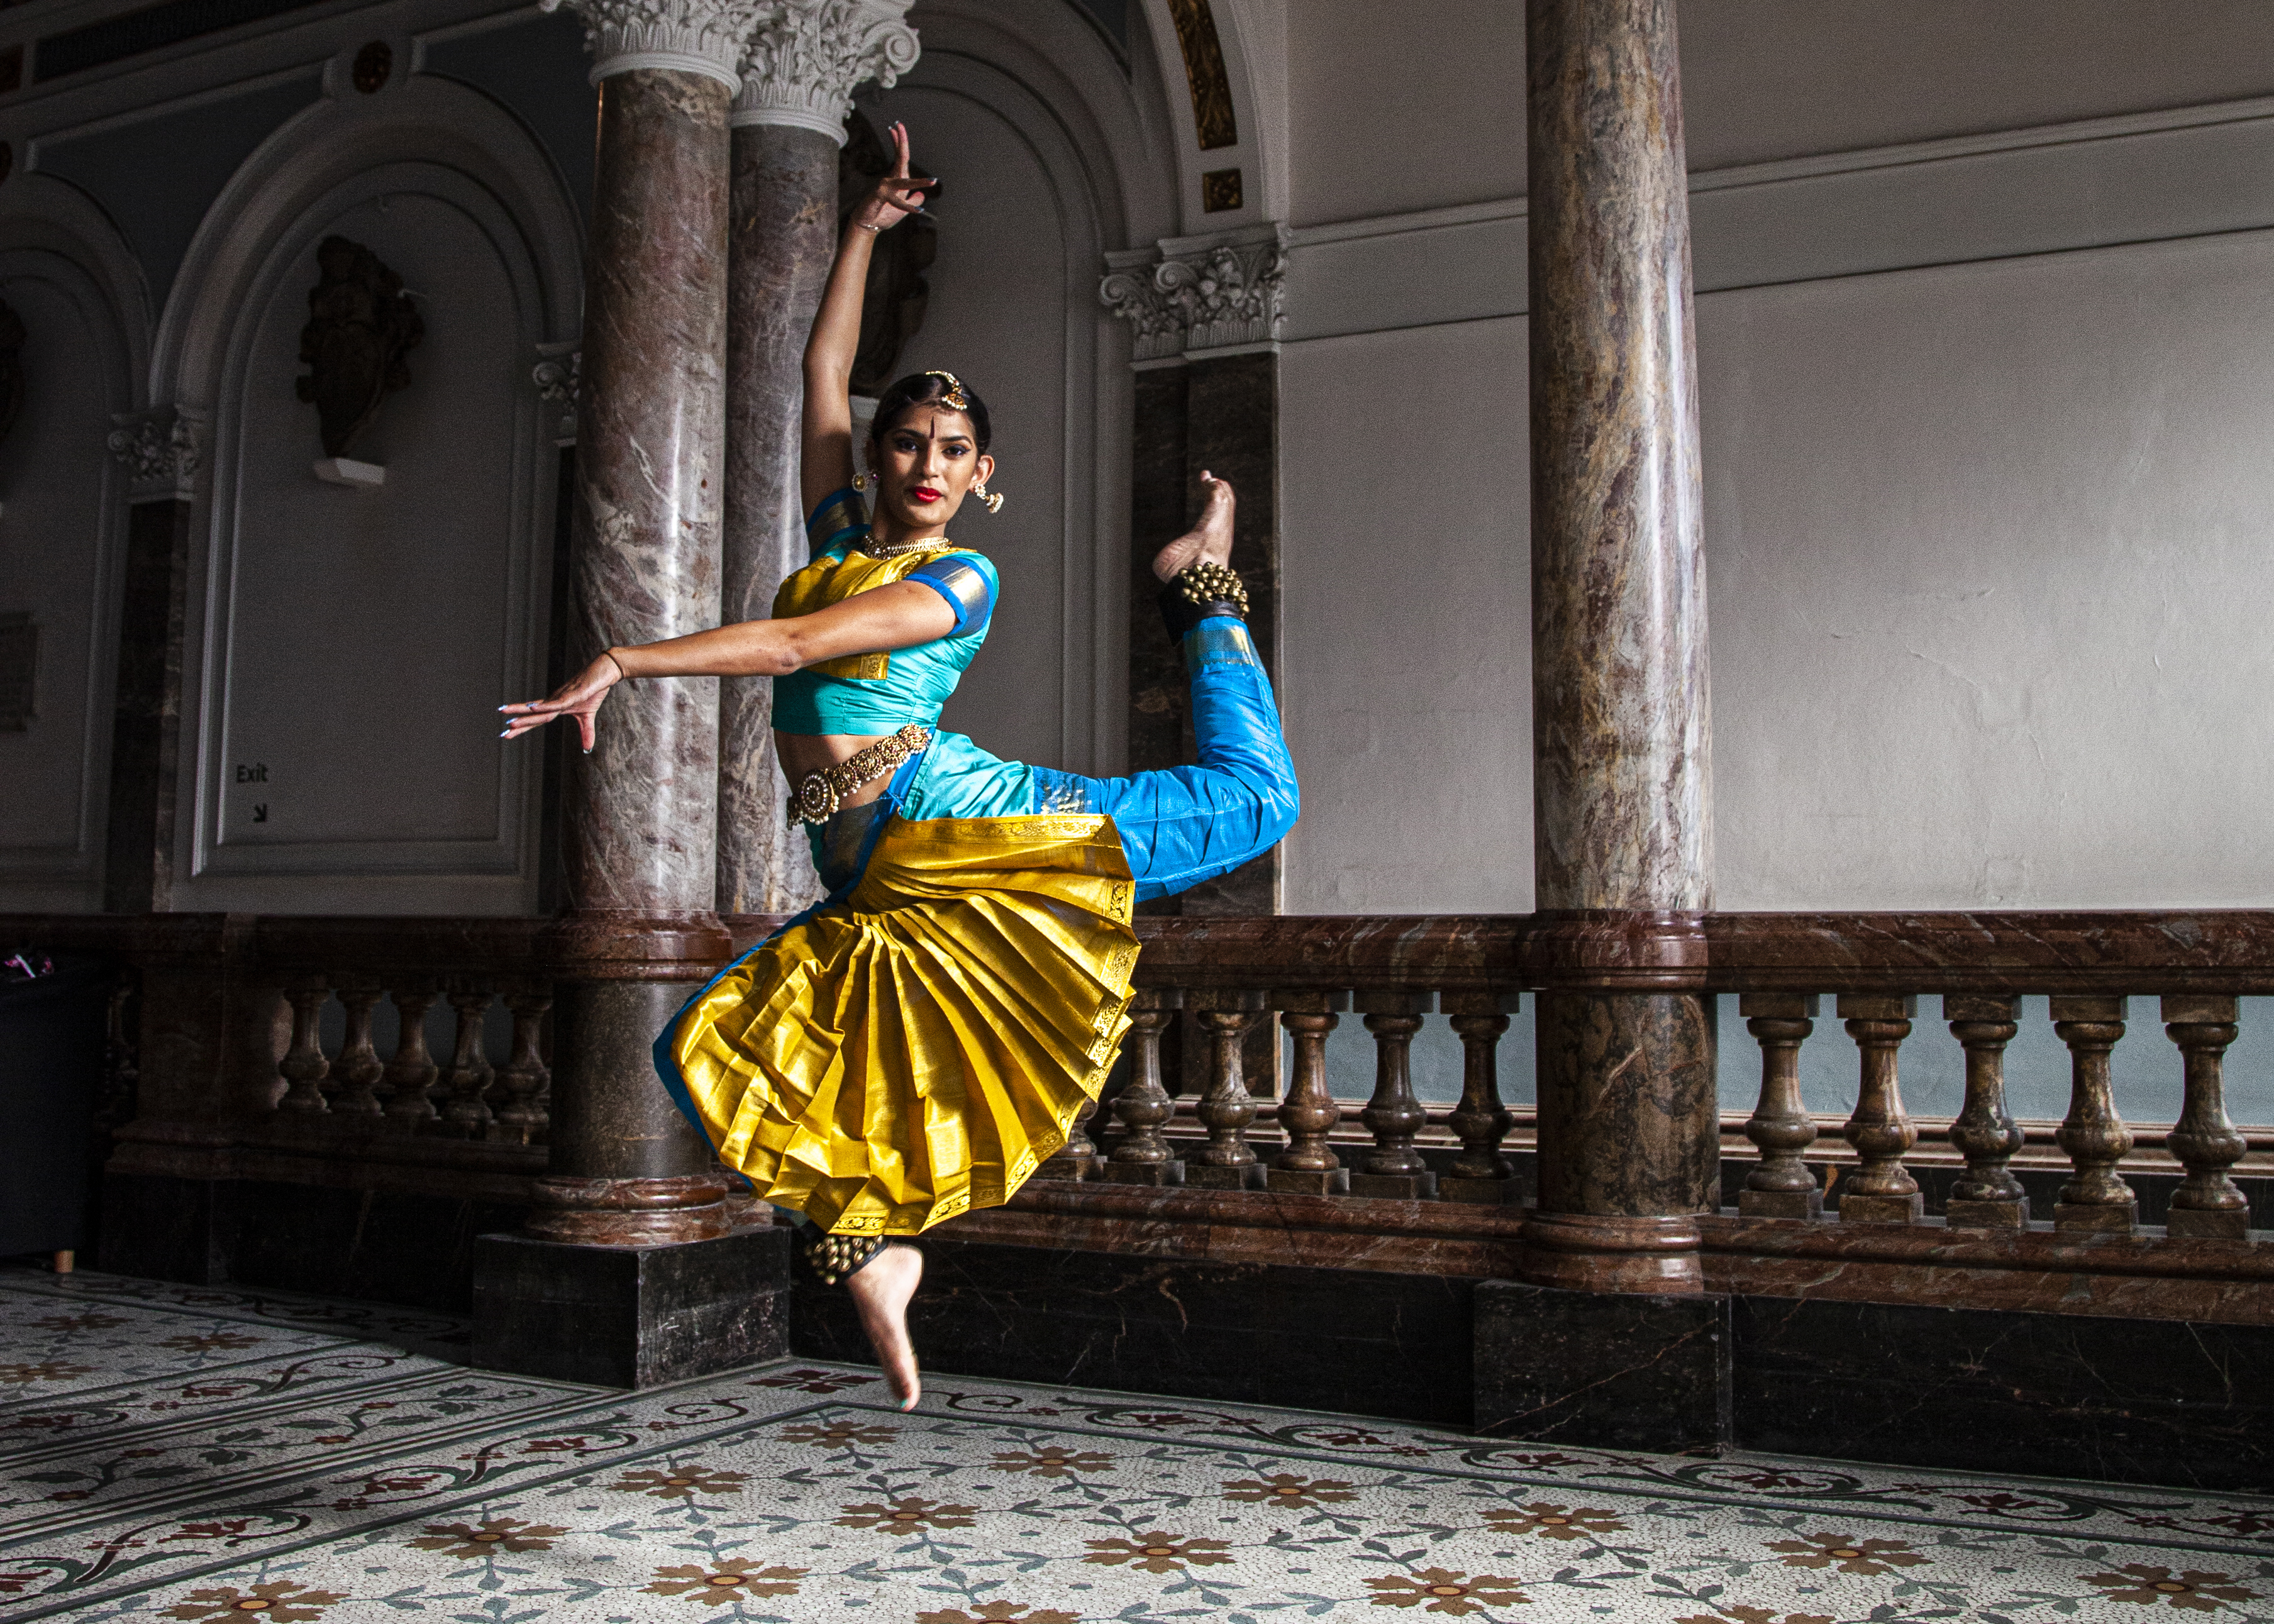 South Asian dancer wearing traditional blue and gold trousers and cropped top with bells on the ankles and a gold jewellery headpiece. Jumping in the air with point toe and one arm above the head and the other crossed over to the left. In front of the museum marble staircase.